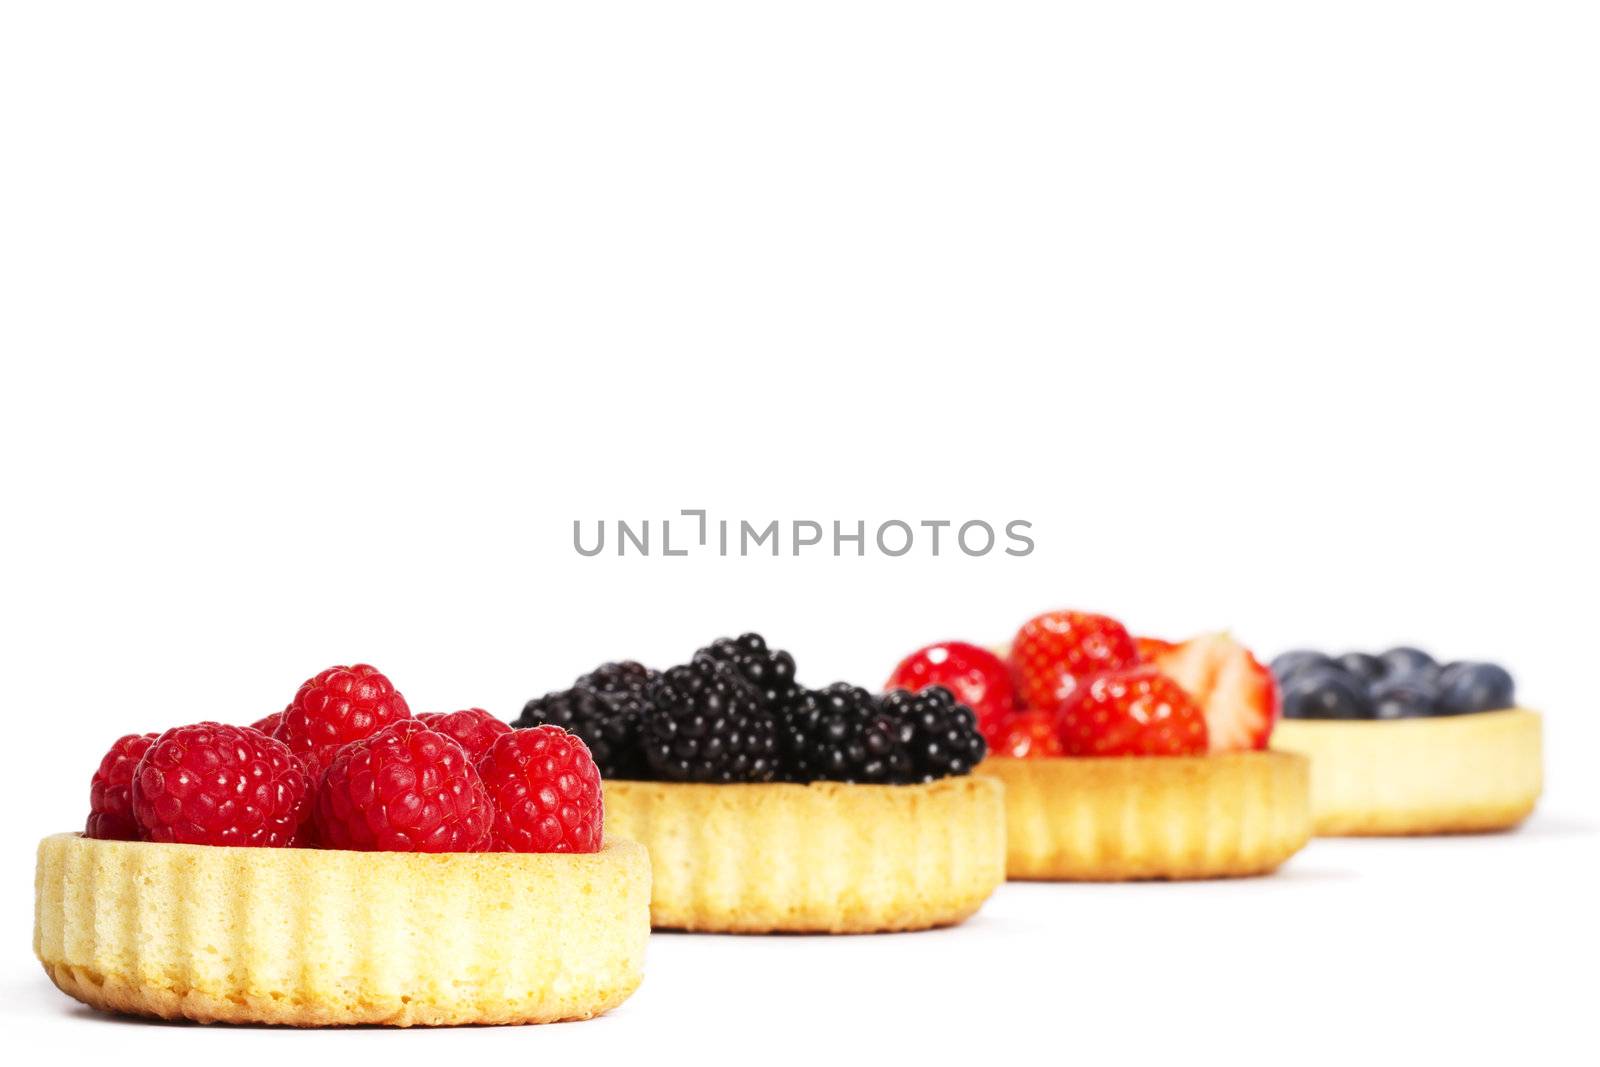 raspberries in tartlet cake in front of other tartlet cakes with wild berries on white background